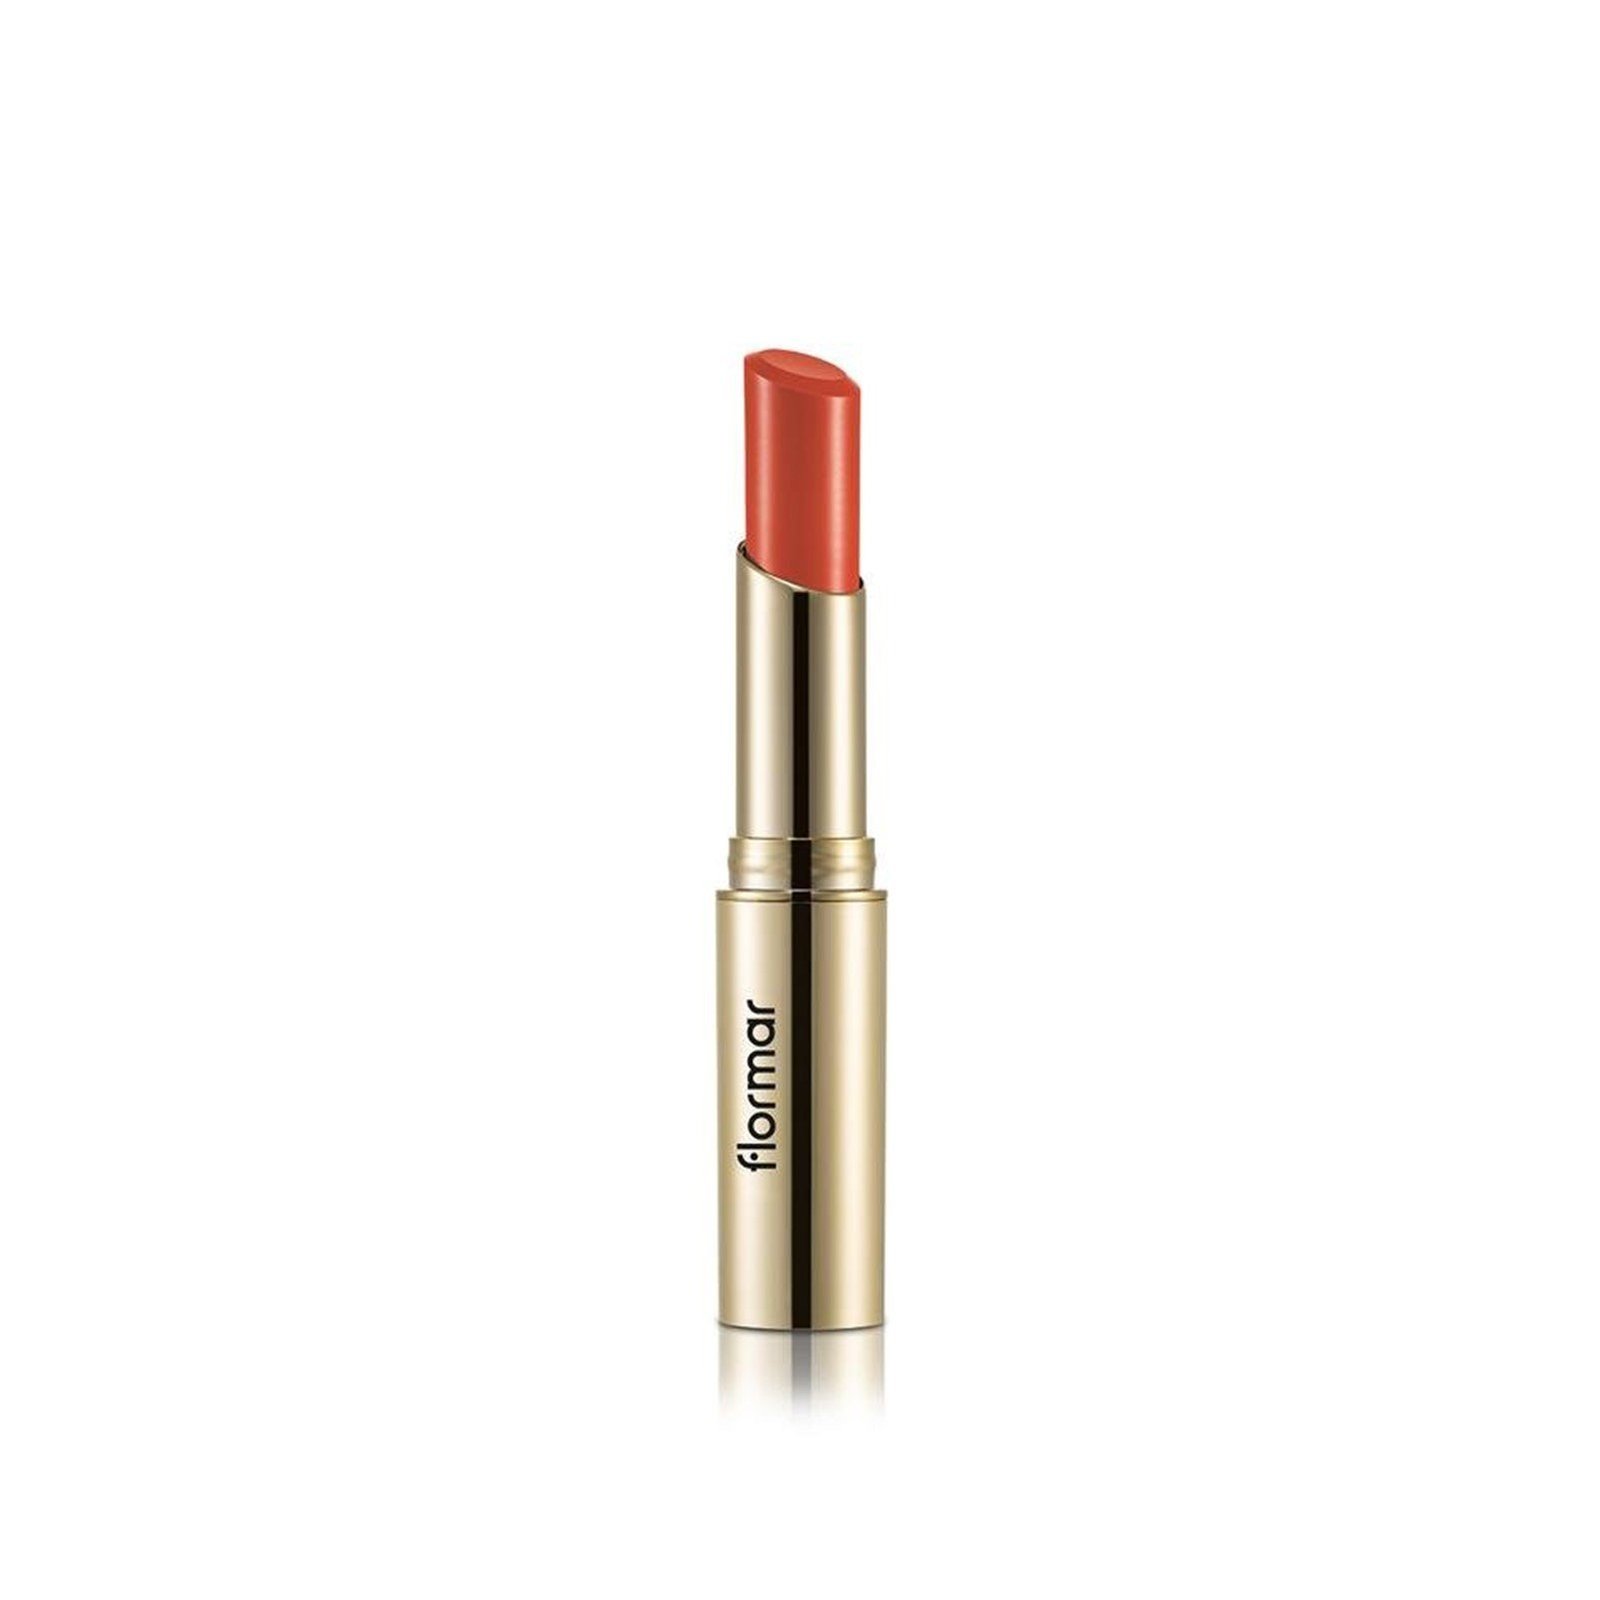 Flormar Deluxe Cashmere Lipstick Stylo DC22 Red In Flames 3g (0.11oz)